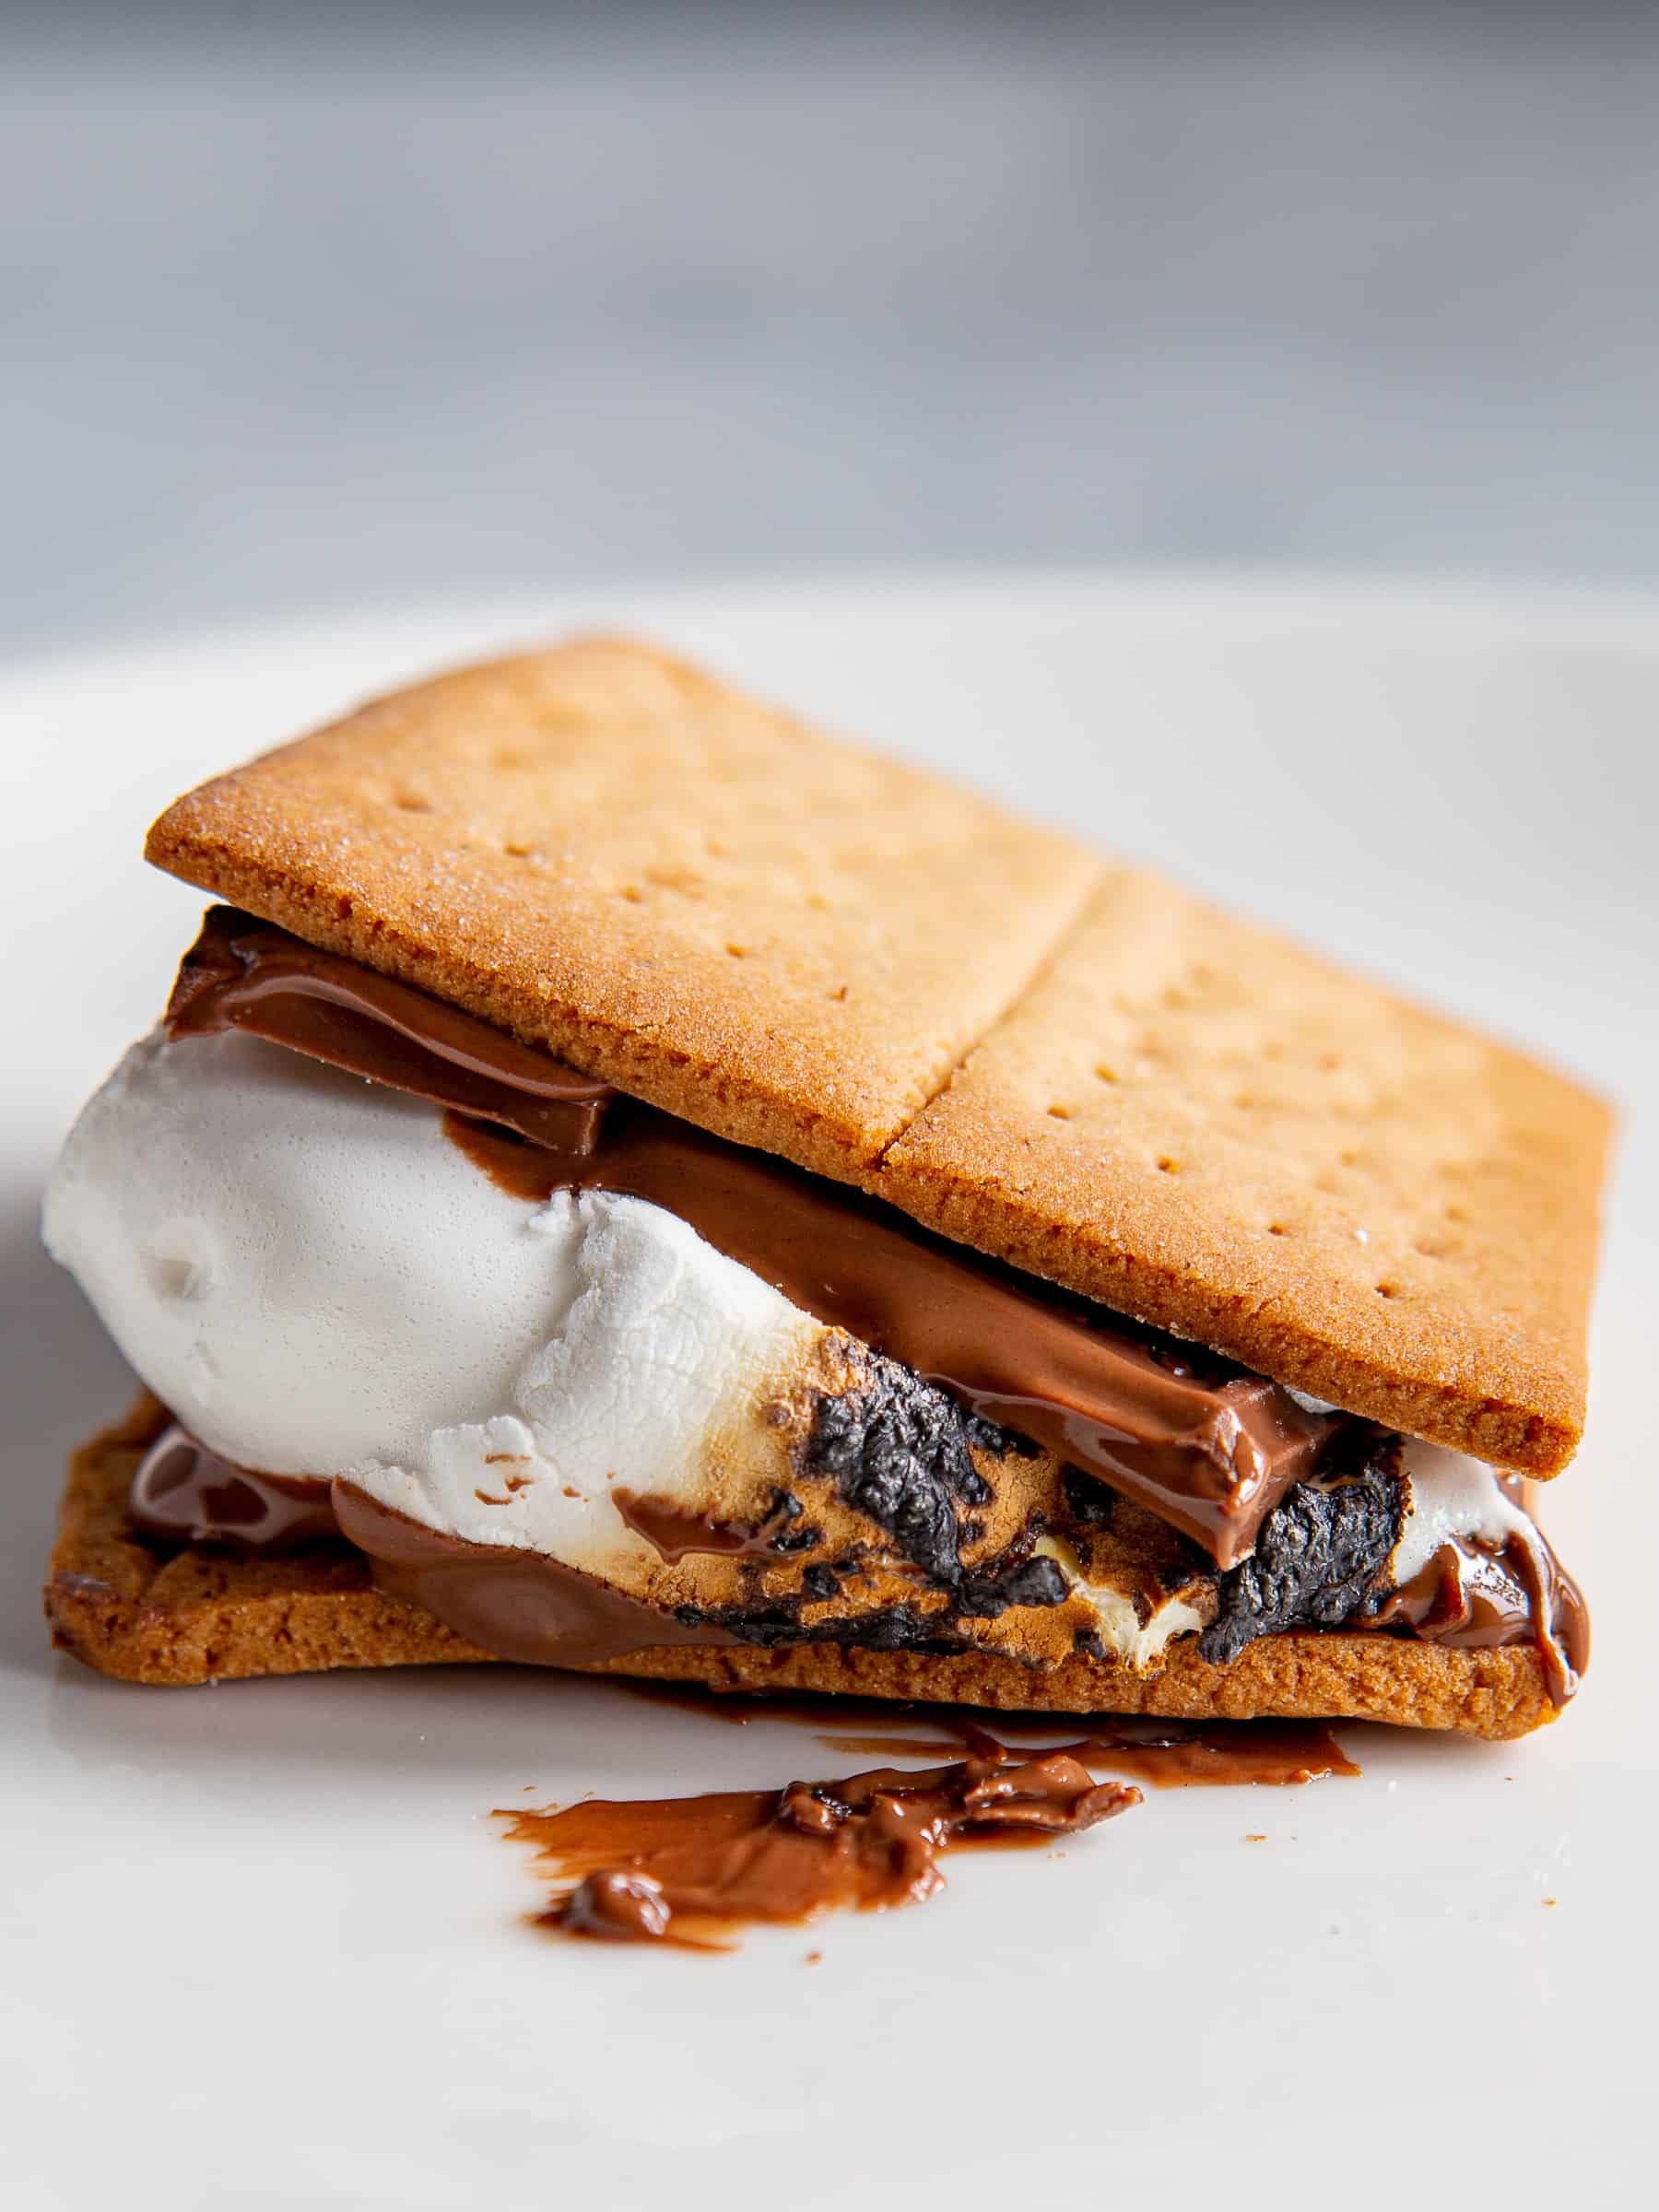 Gluten-free graham cracker used as the base for a s'more. A toasted marshmallow and chocolate are sandwiched between the graham crackers.